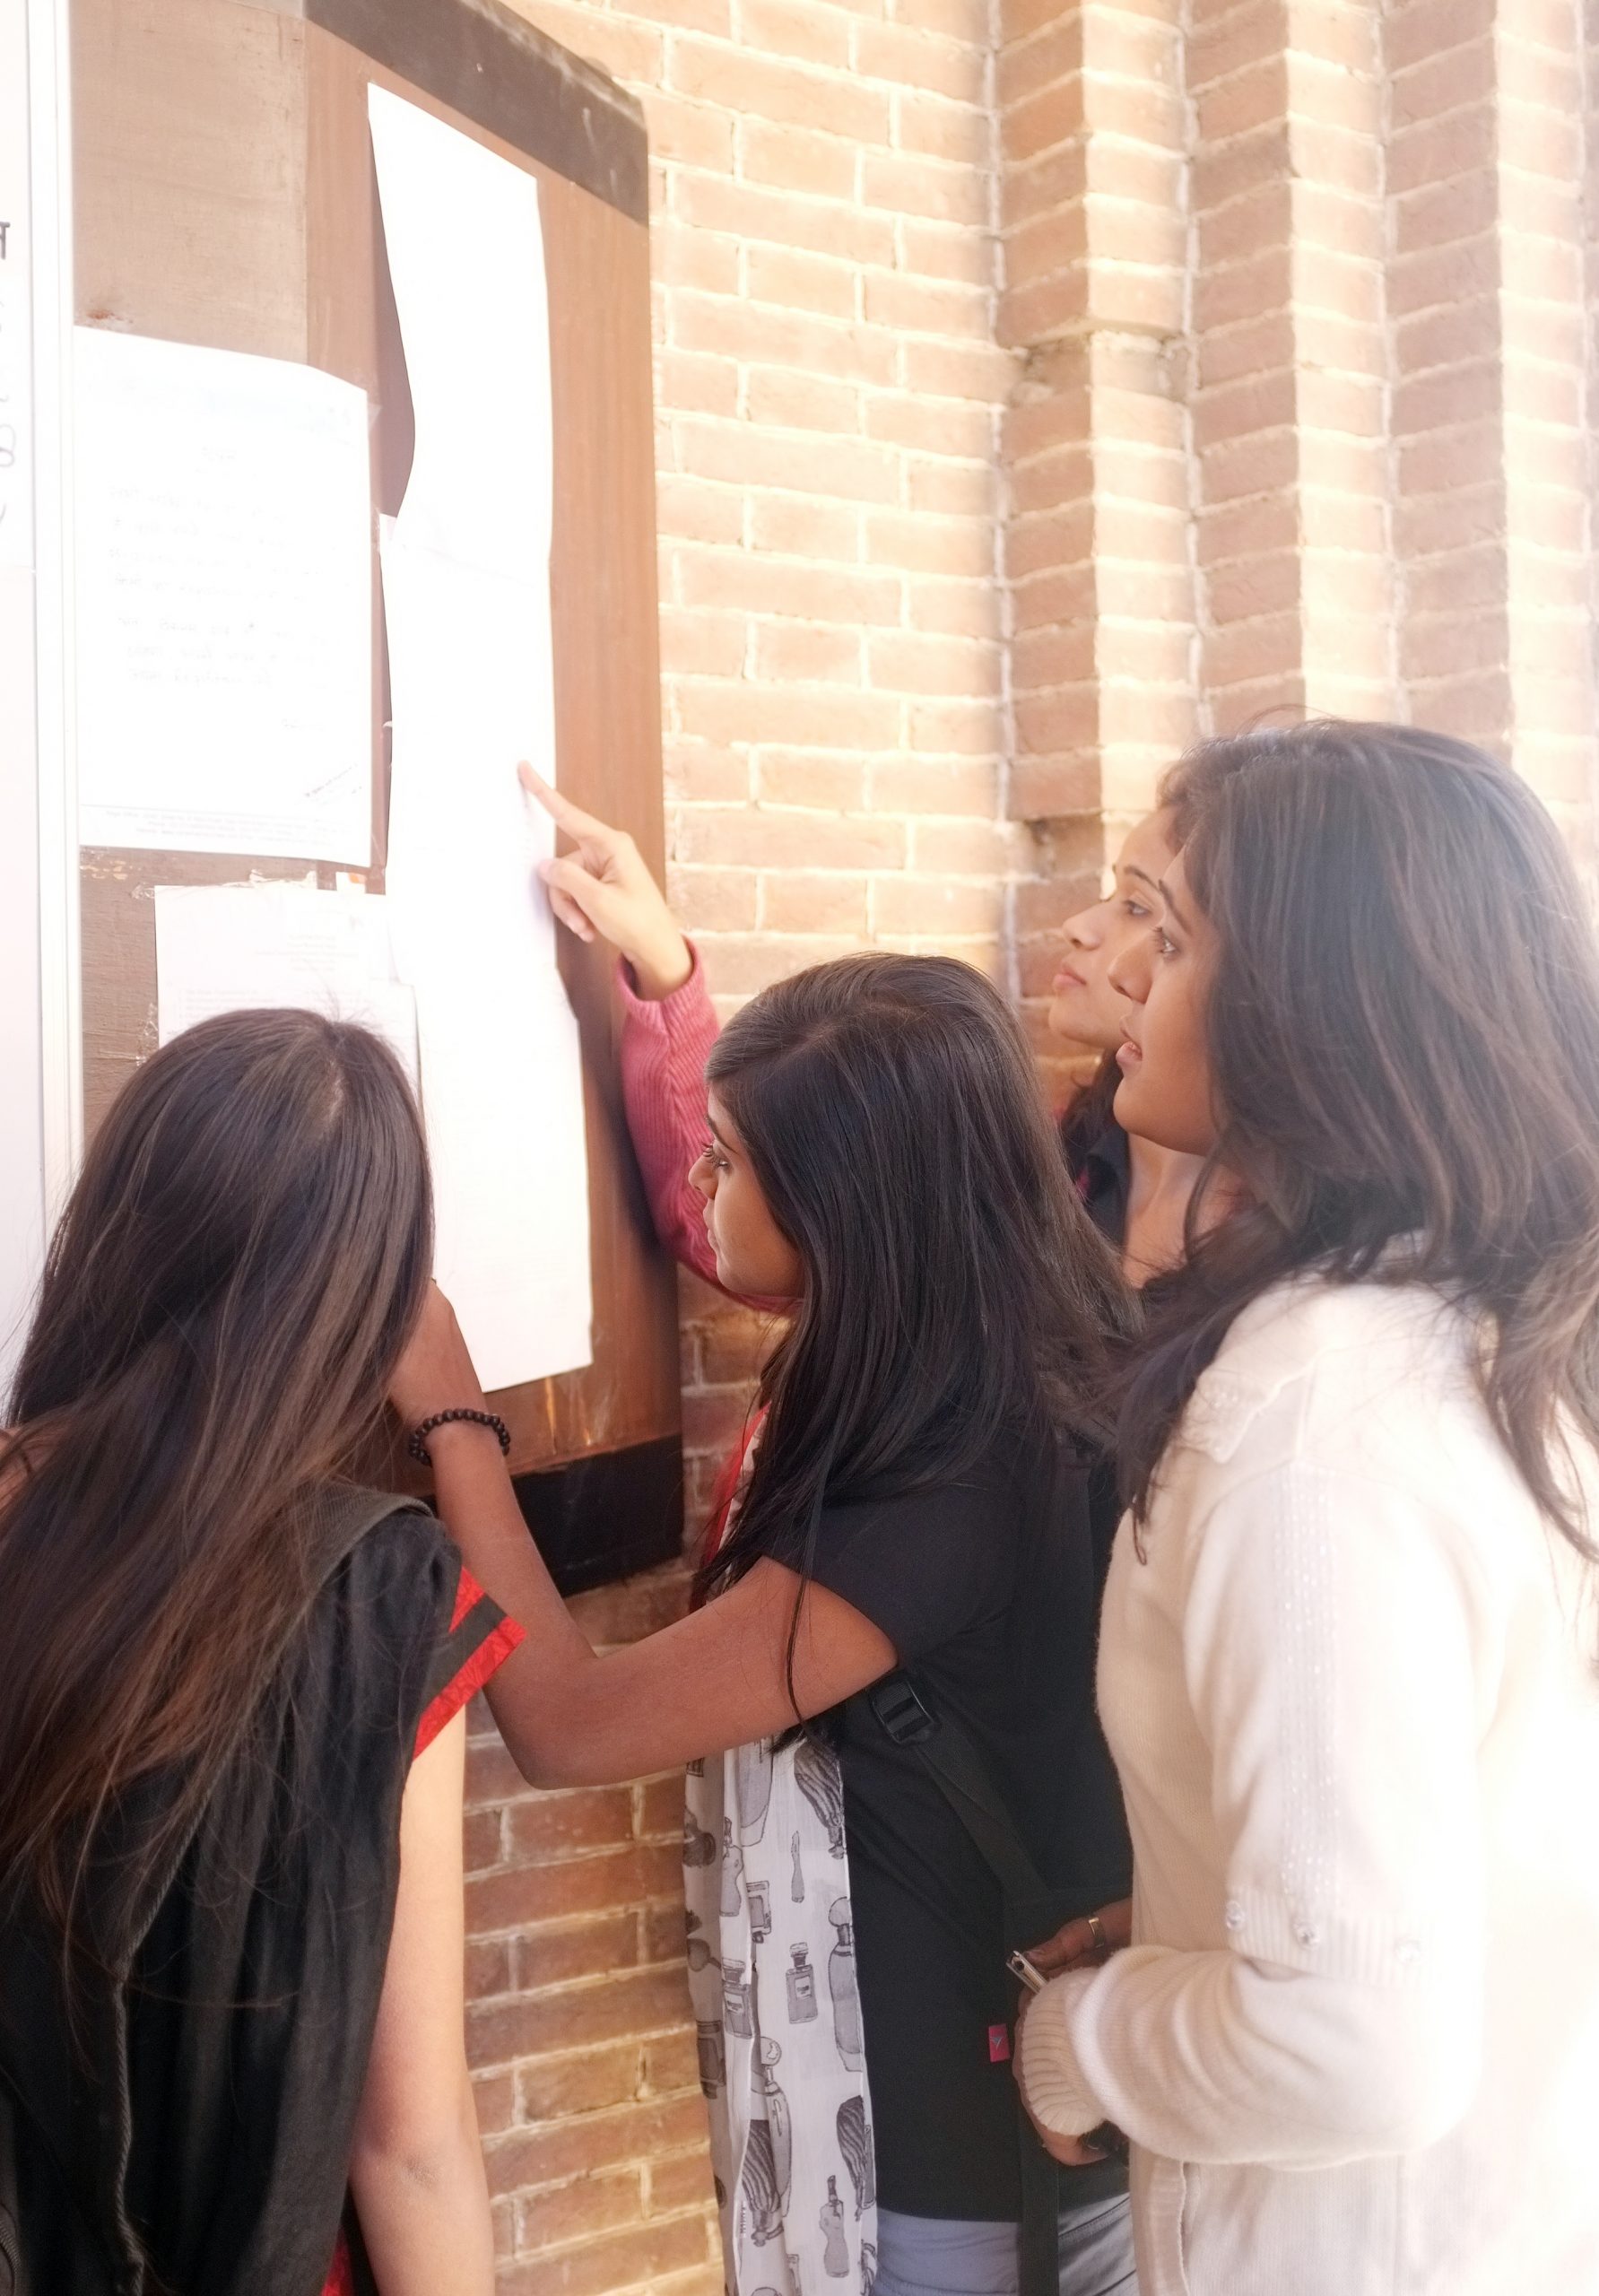 Women looking at community listing board